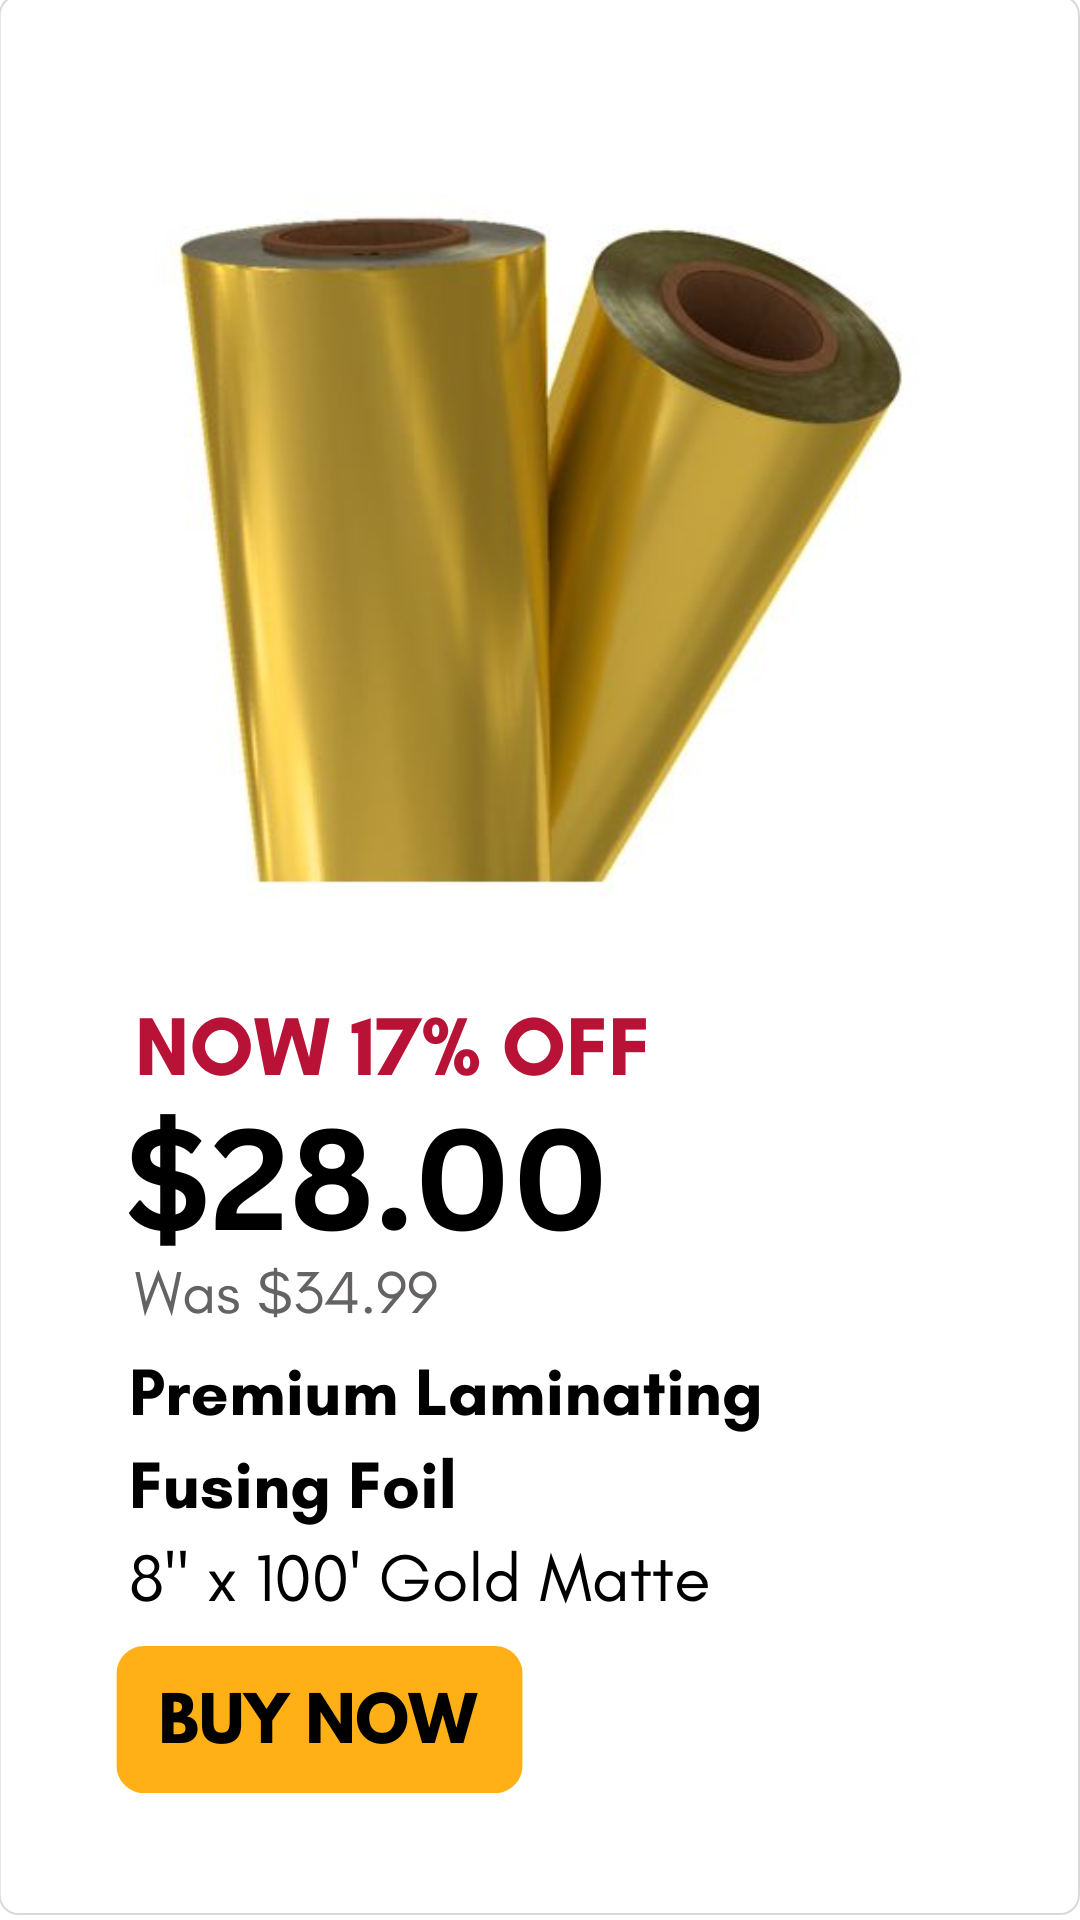 Premium Laminating Fusing Foil 8" x 100' gold matte on sale for 17% off on MyBinding.com